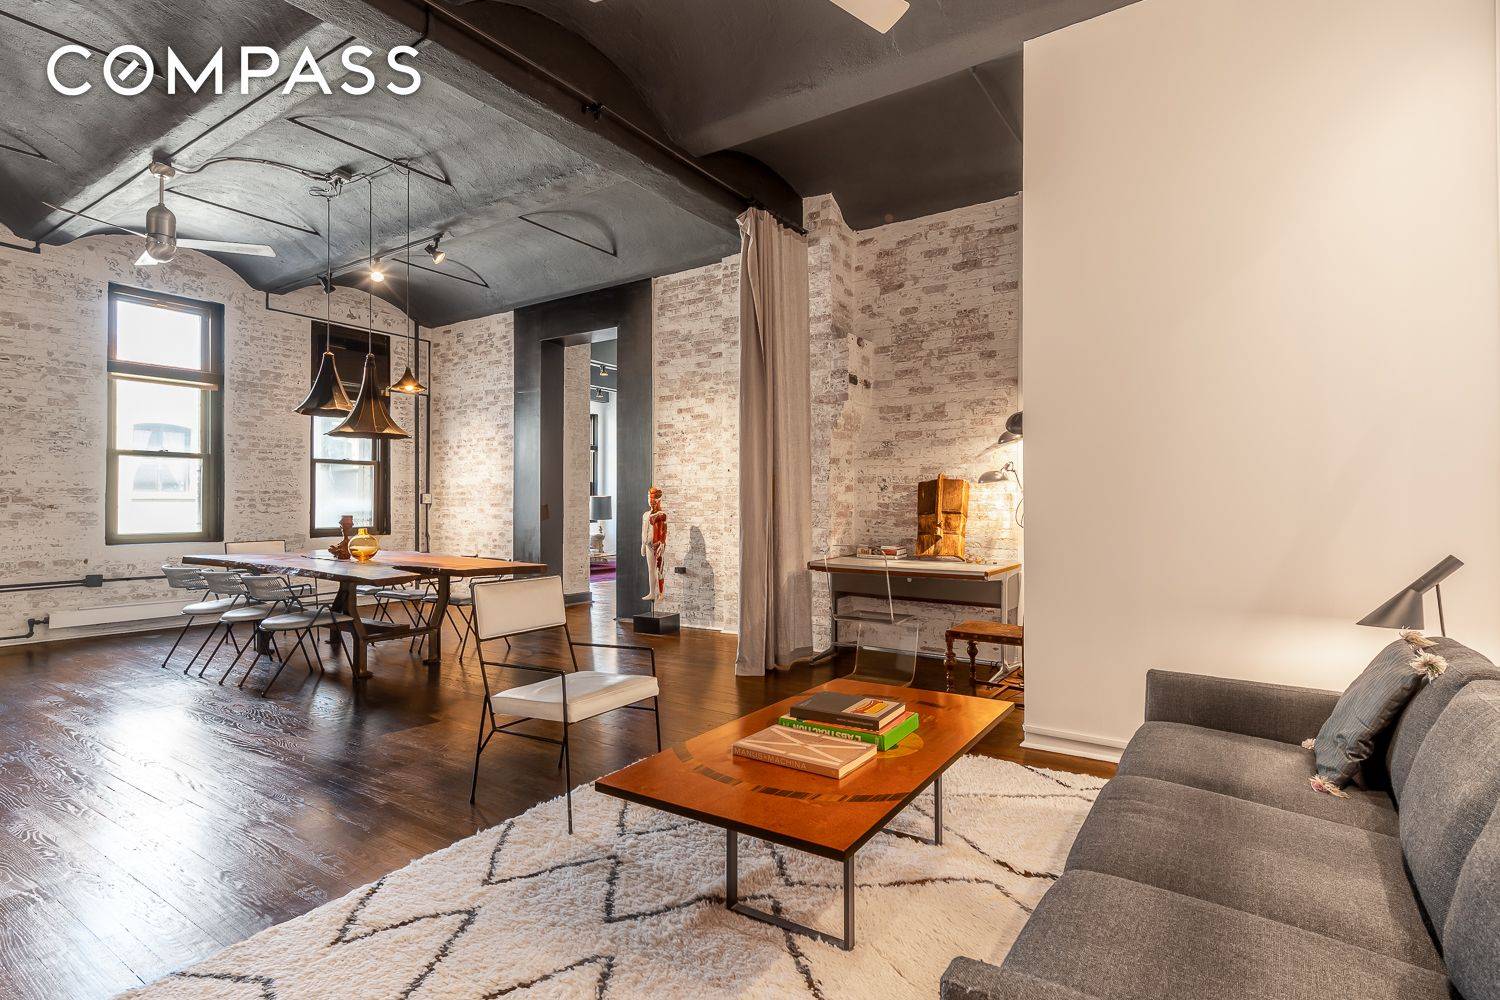 Enjoy urban living in this wonderful loft home accentuating authentic pre war and industrial details with smart modern design and custom finishes.